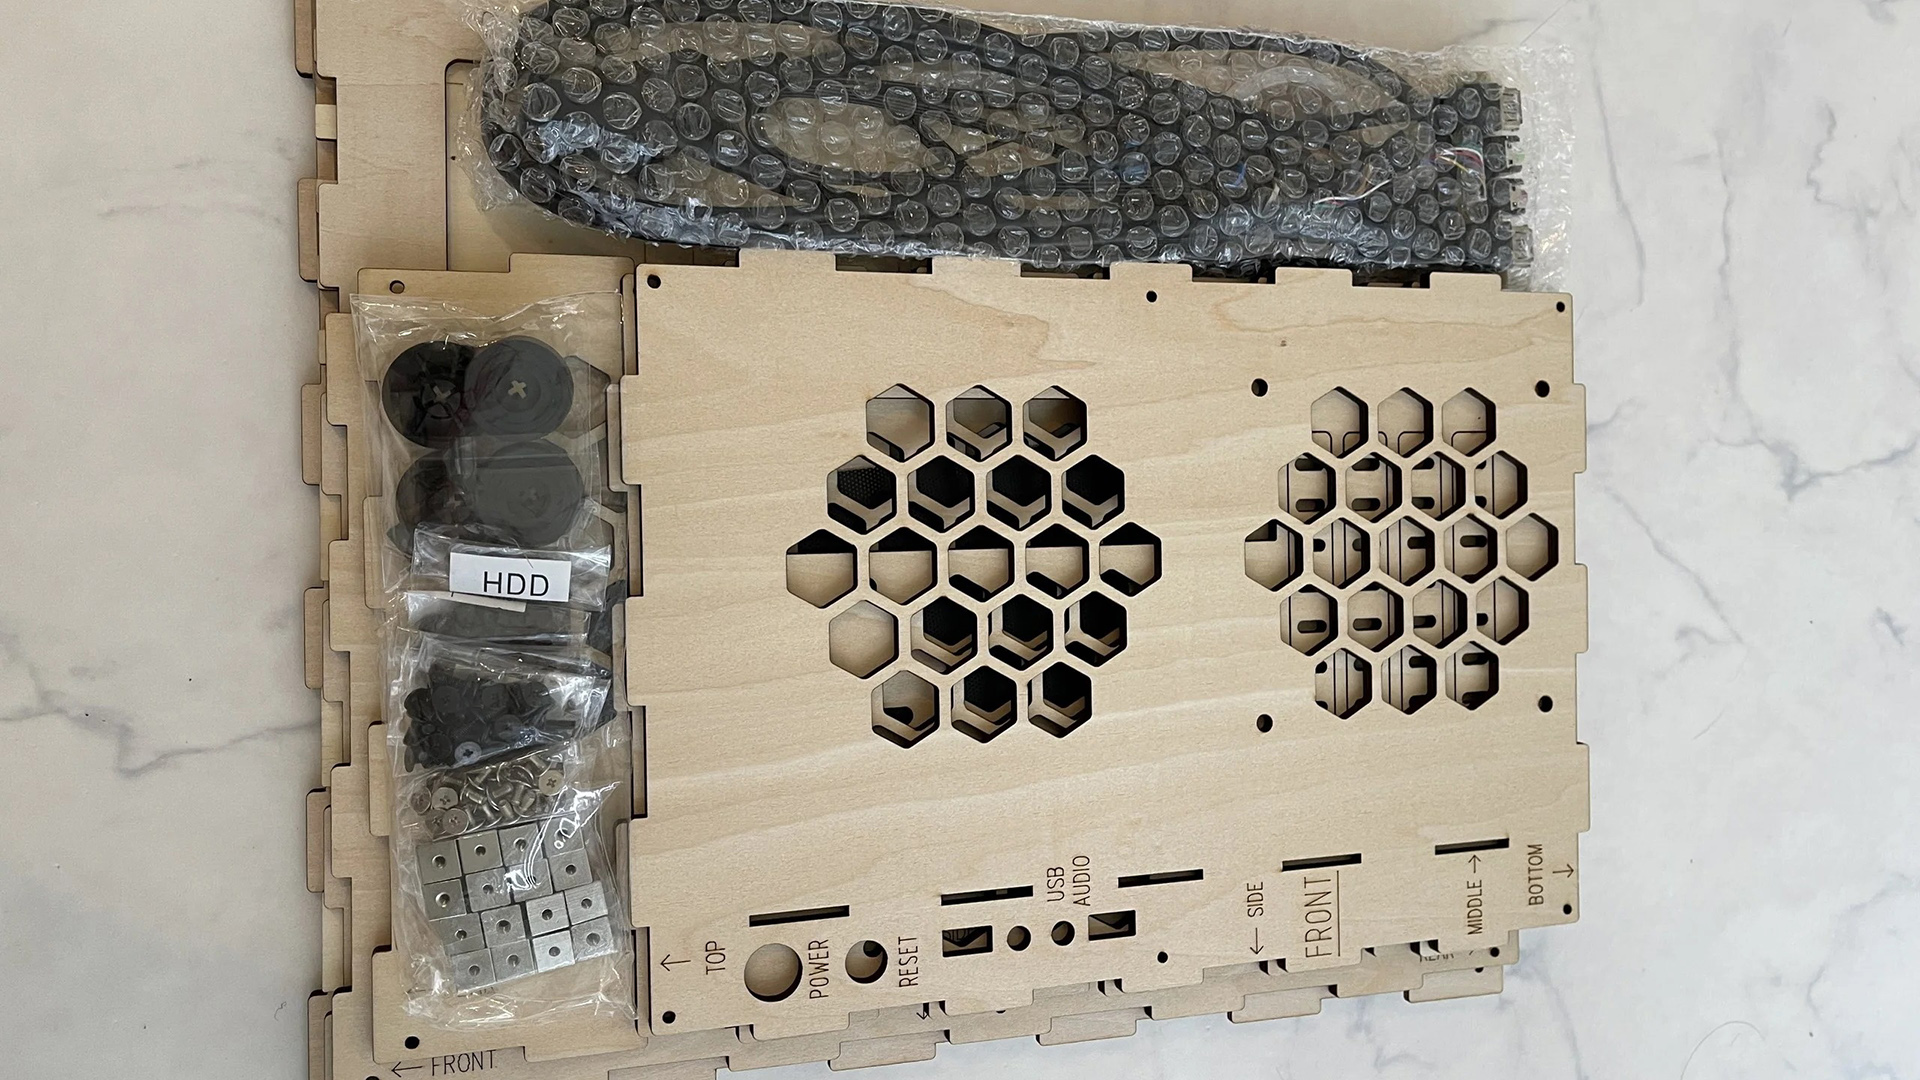 The wooden case build in parts